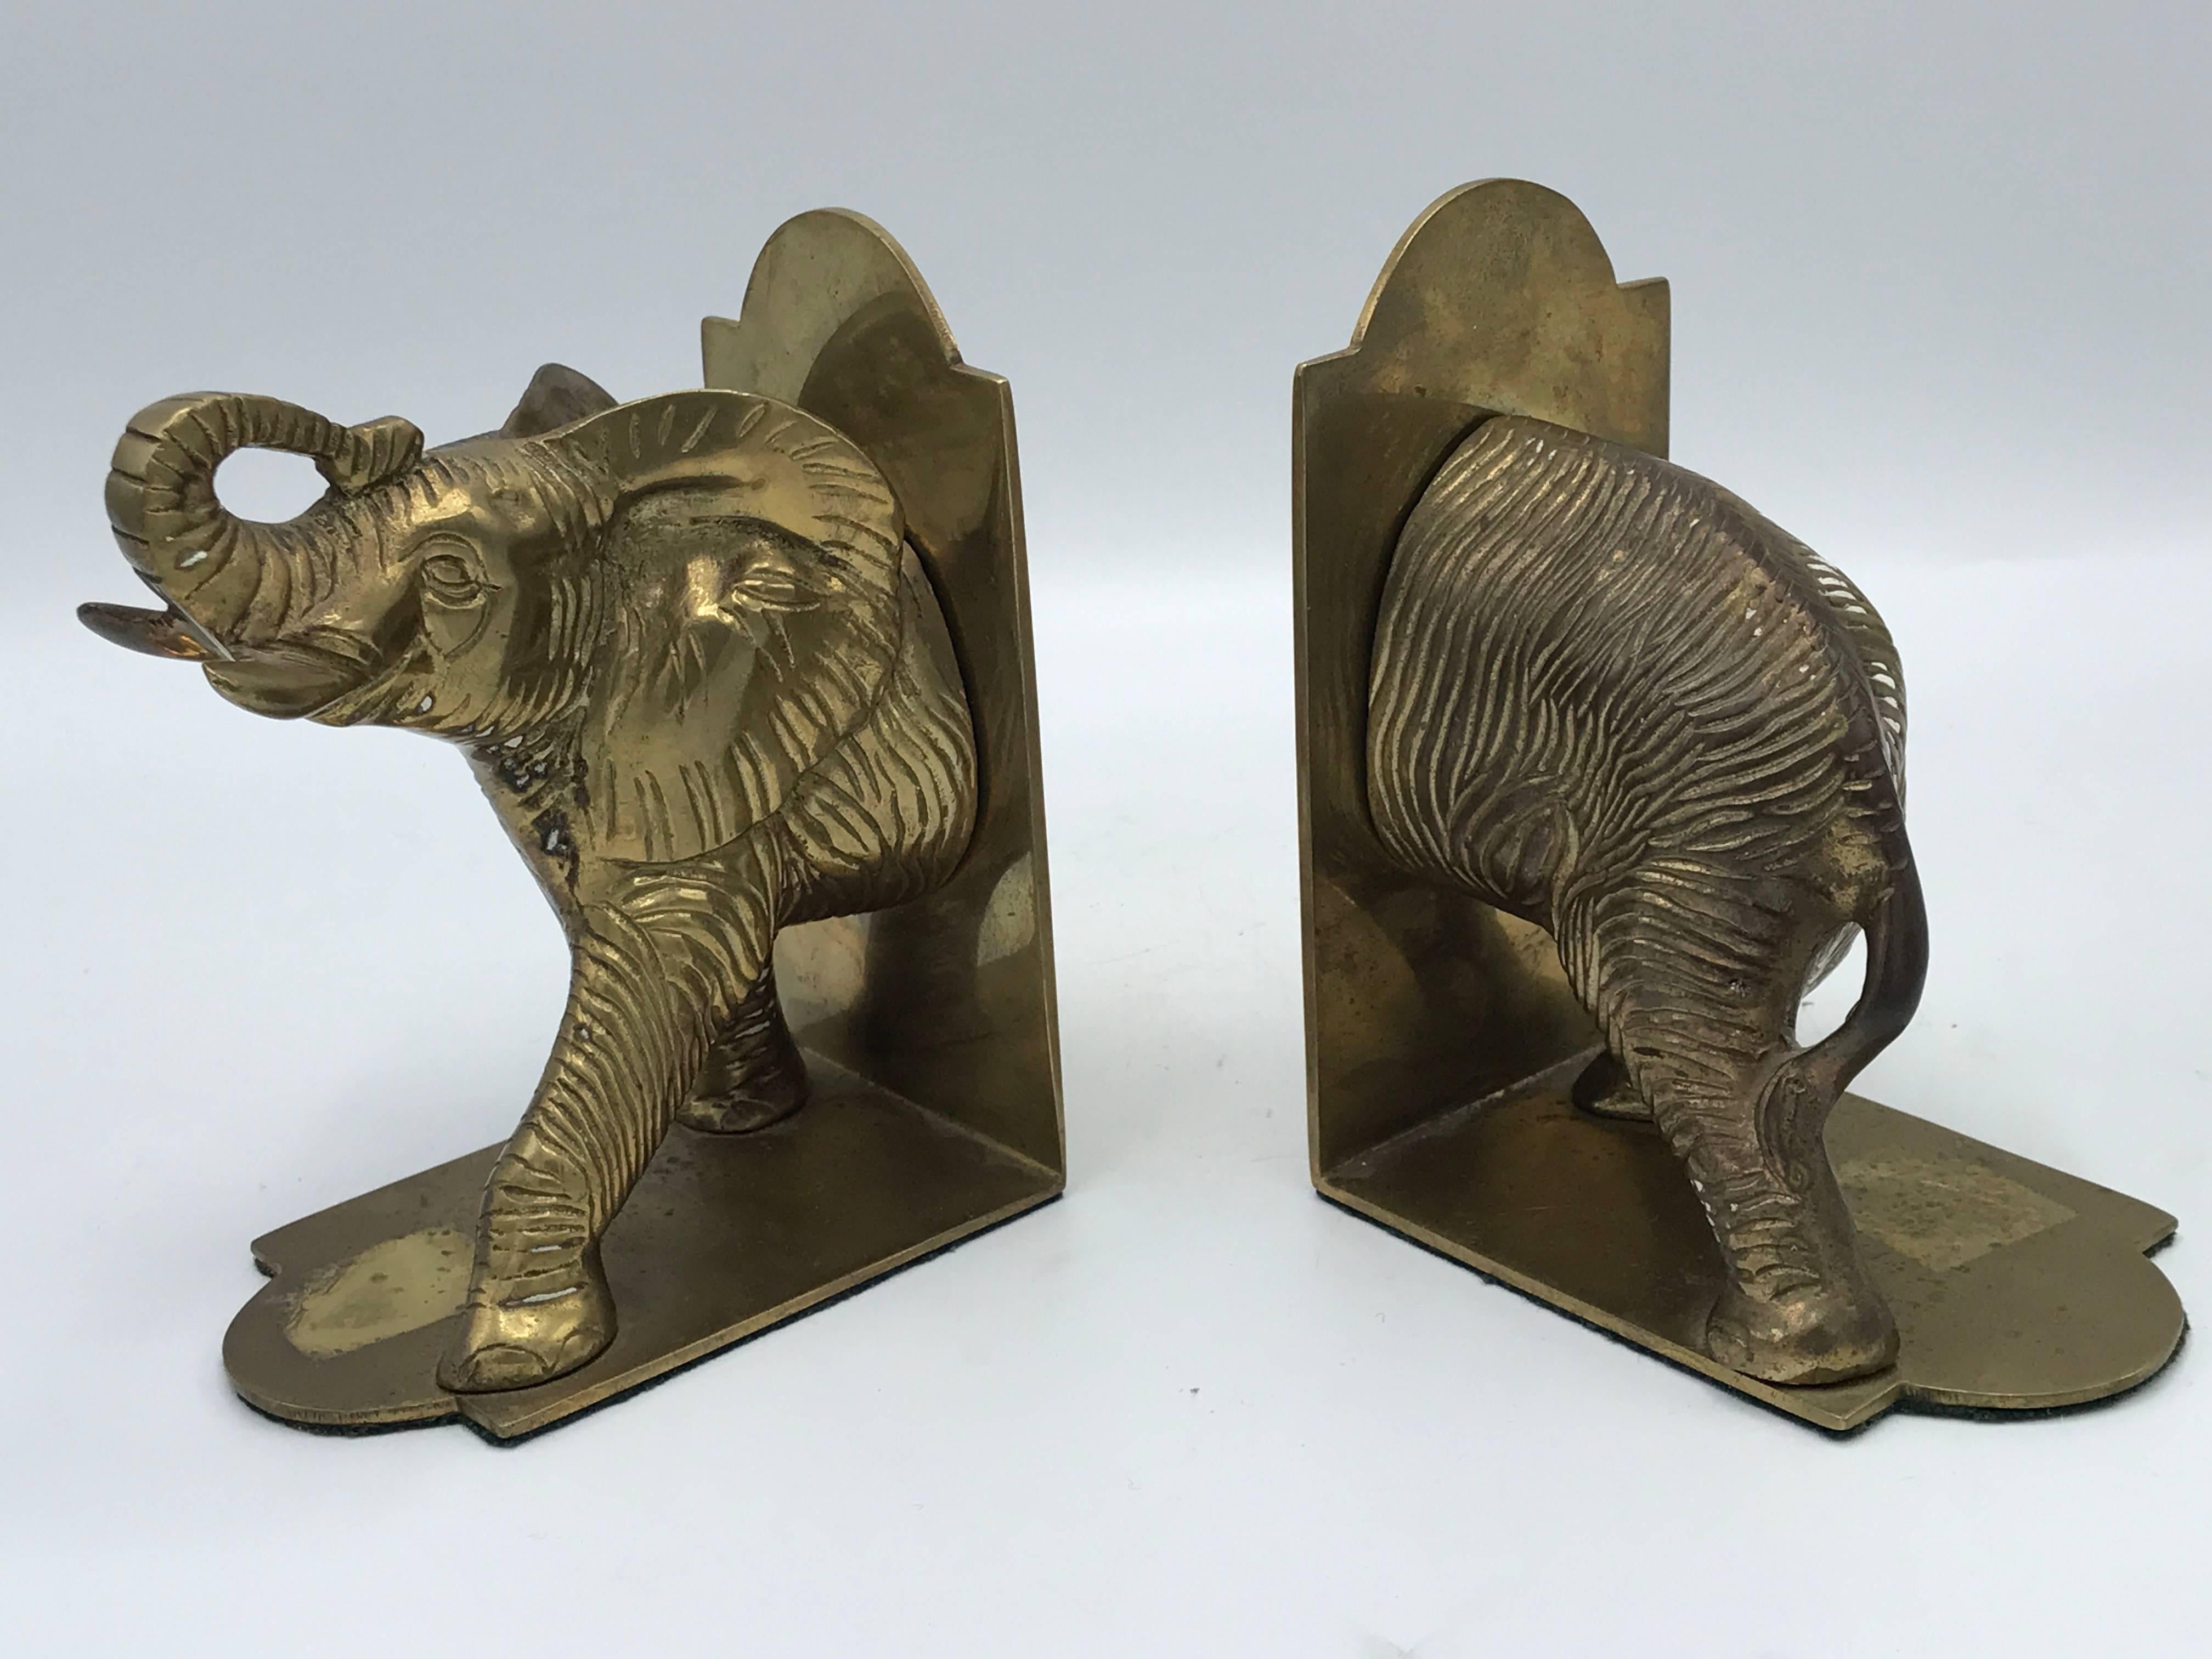 Offered is a stunning pair of 1960s brass elephant sculpture statues.